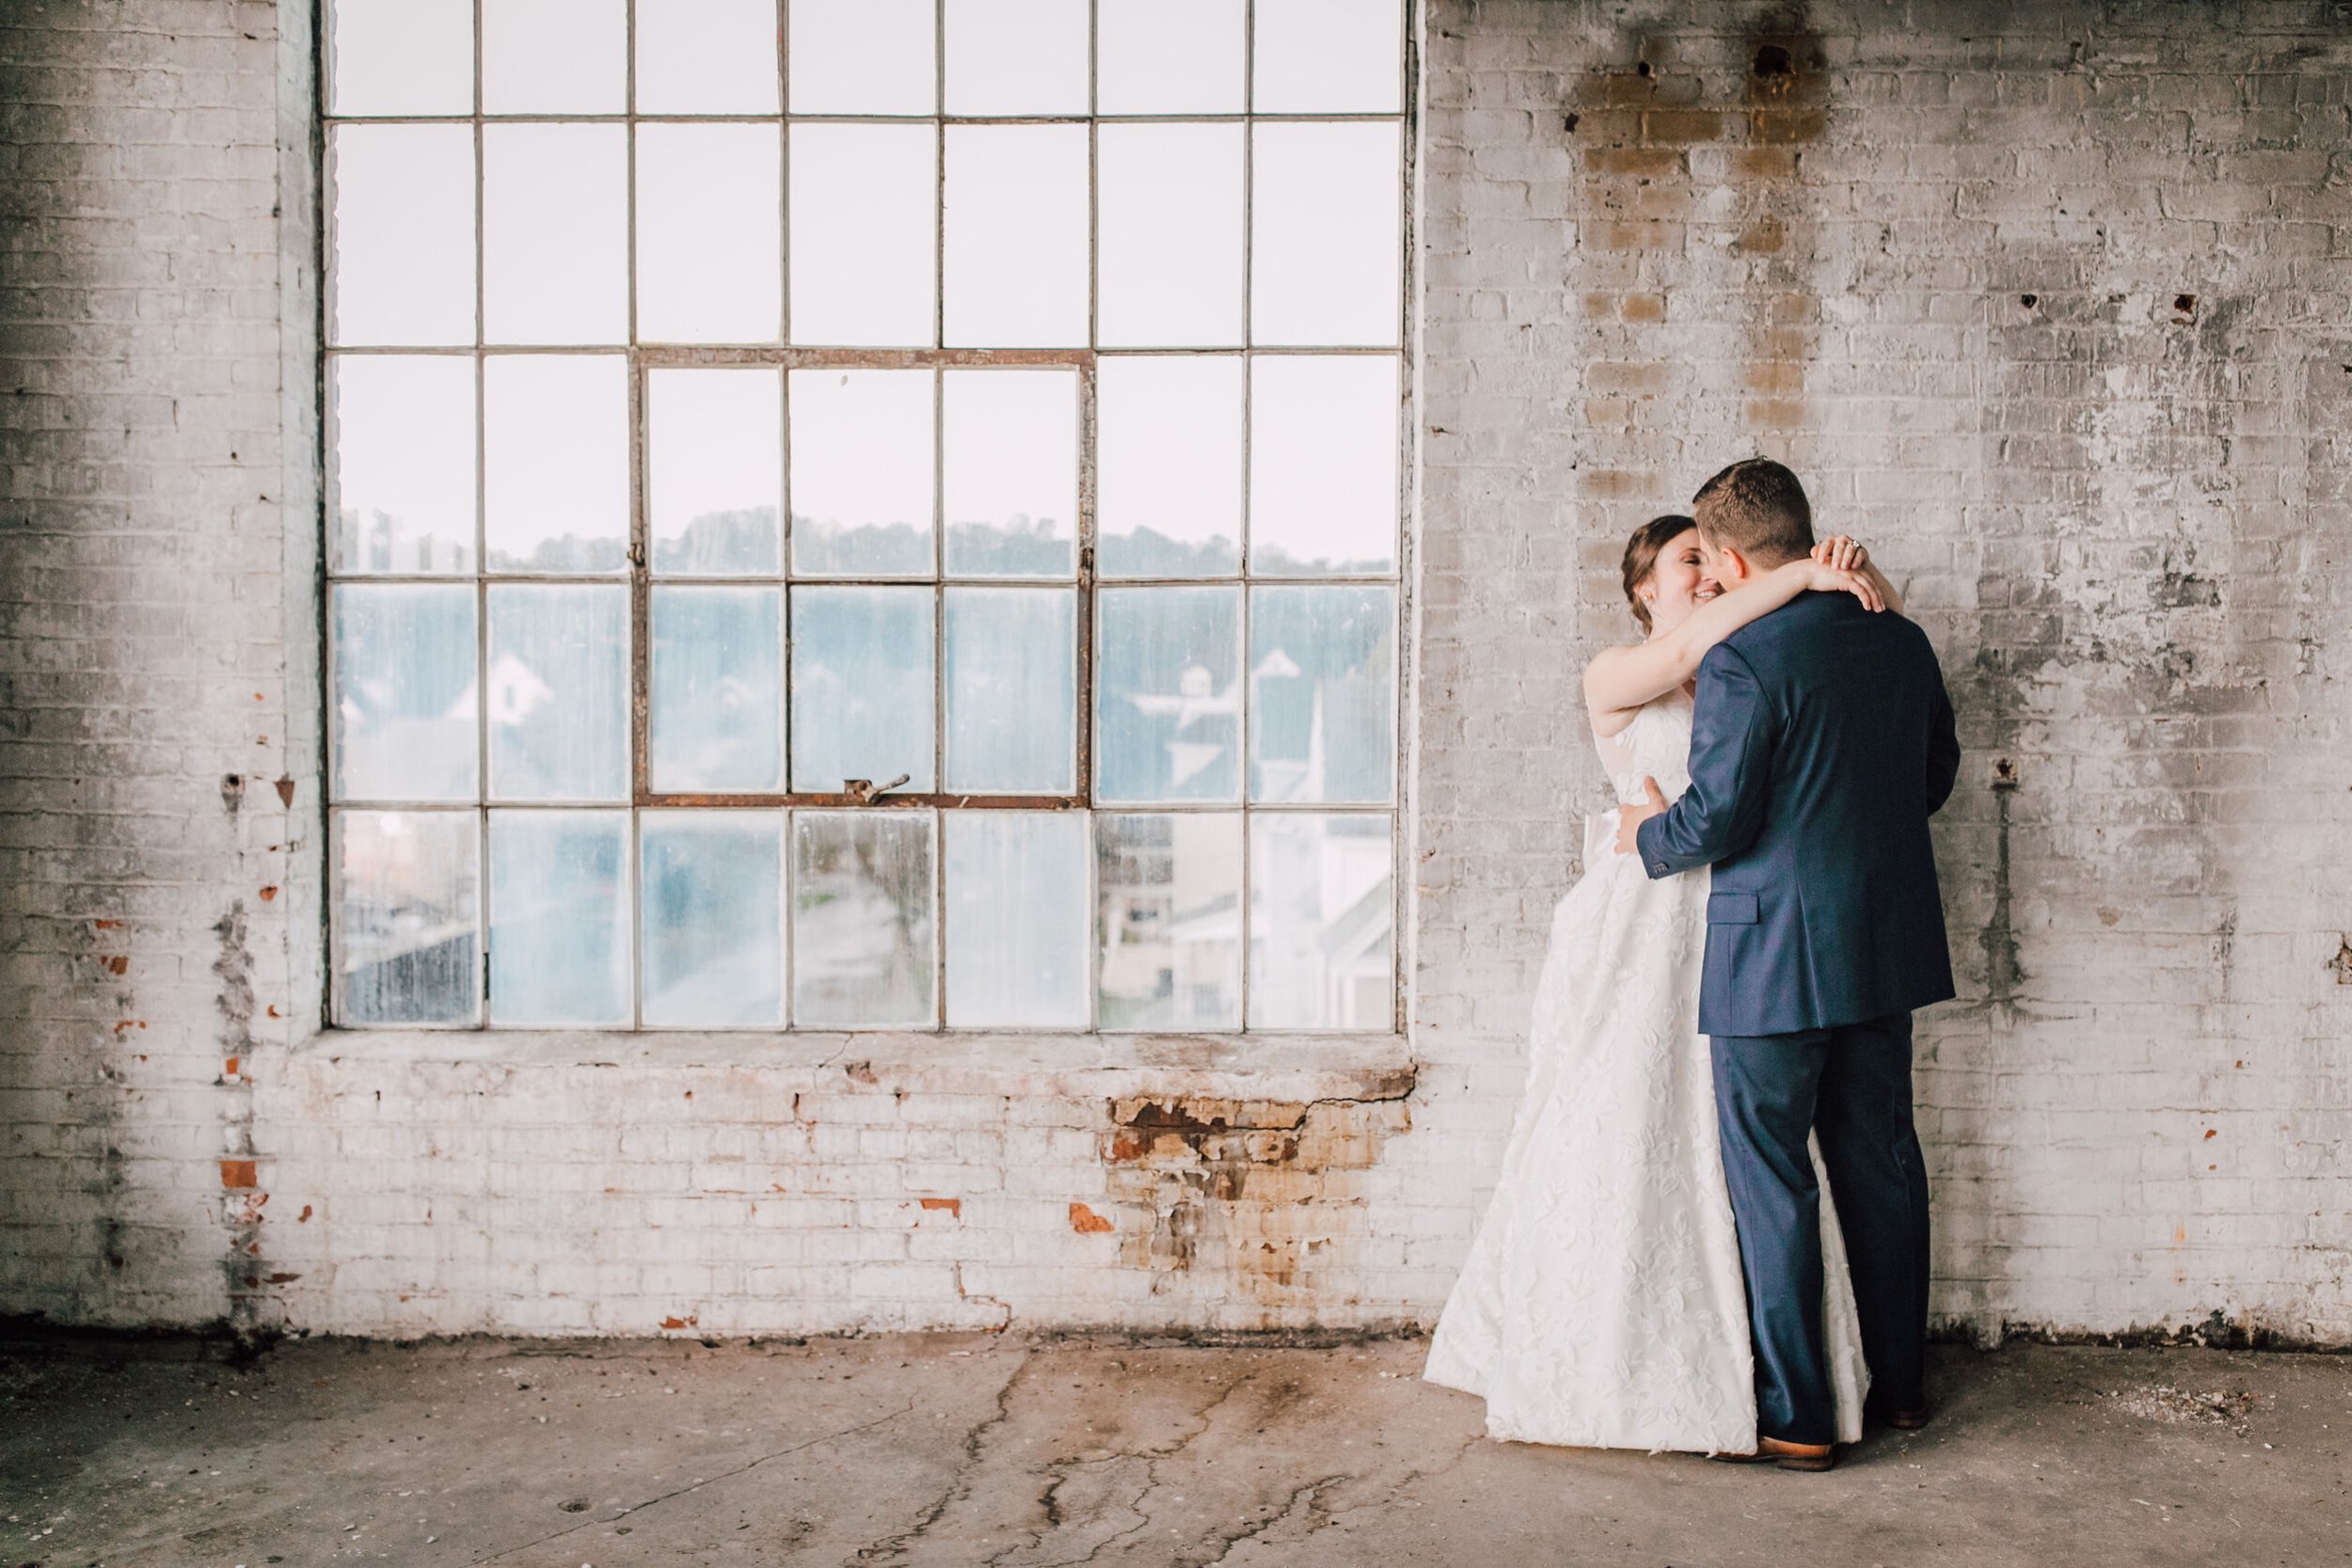  Bride and groom look at each other at their warehouse wedding 